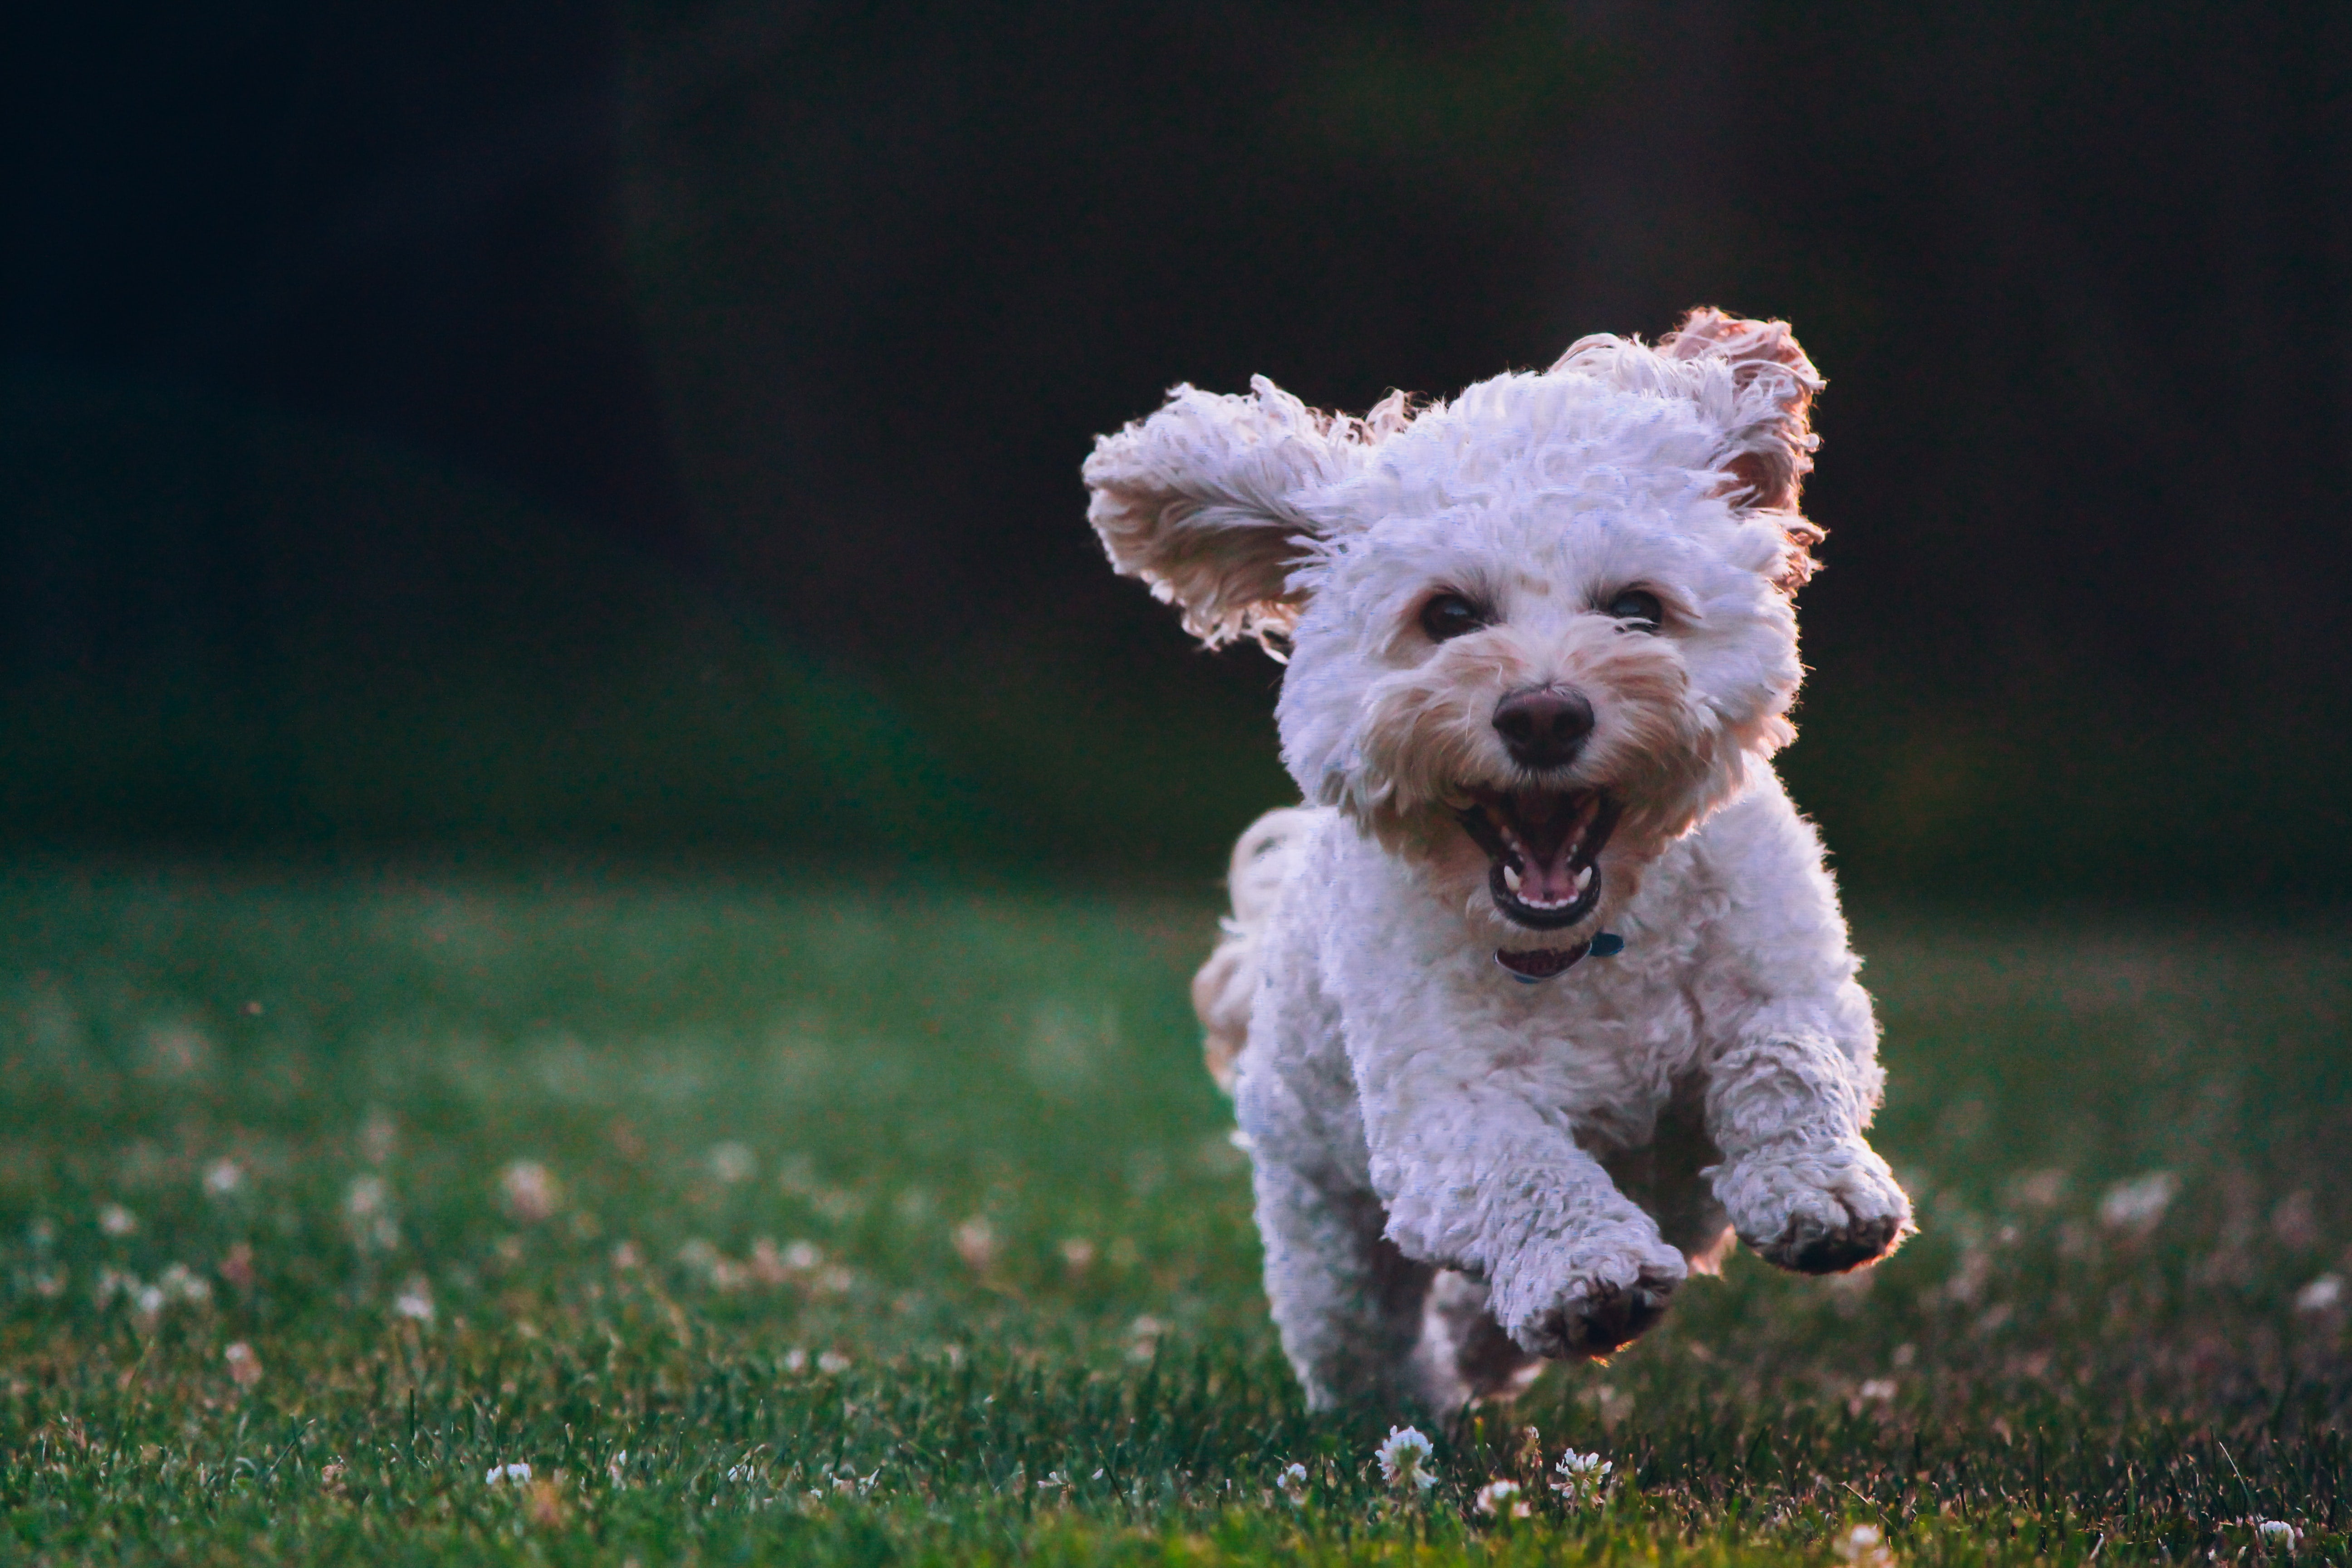  Poodle Maltese mix running doing zoomies in the grass.